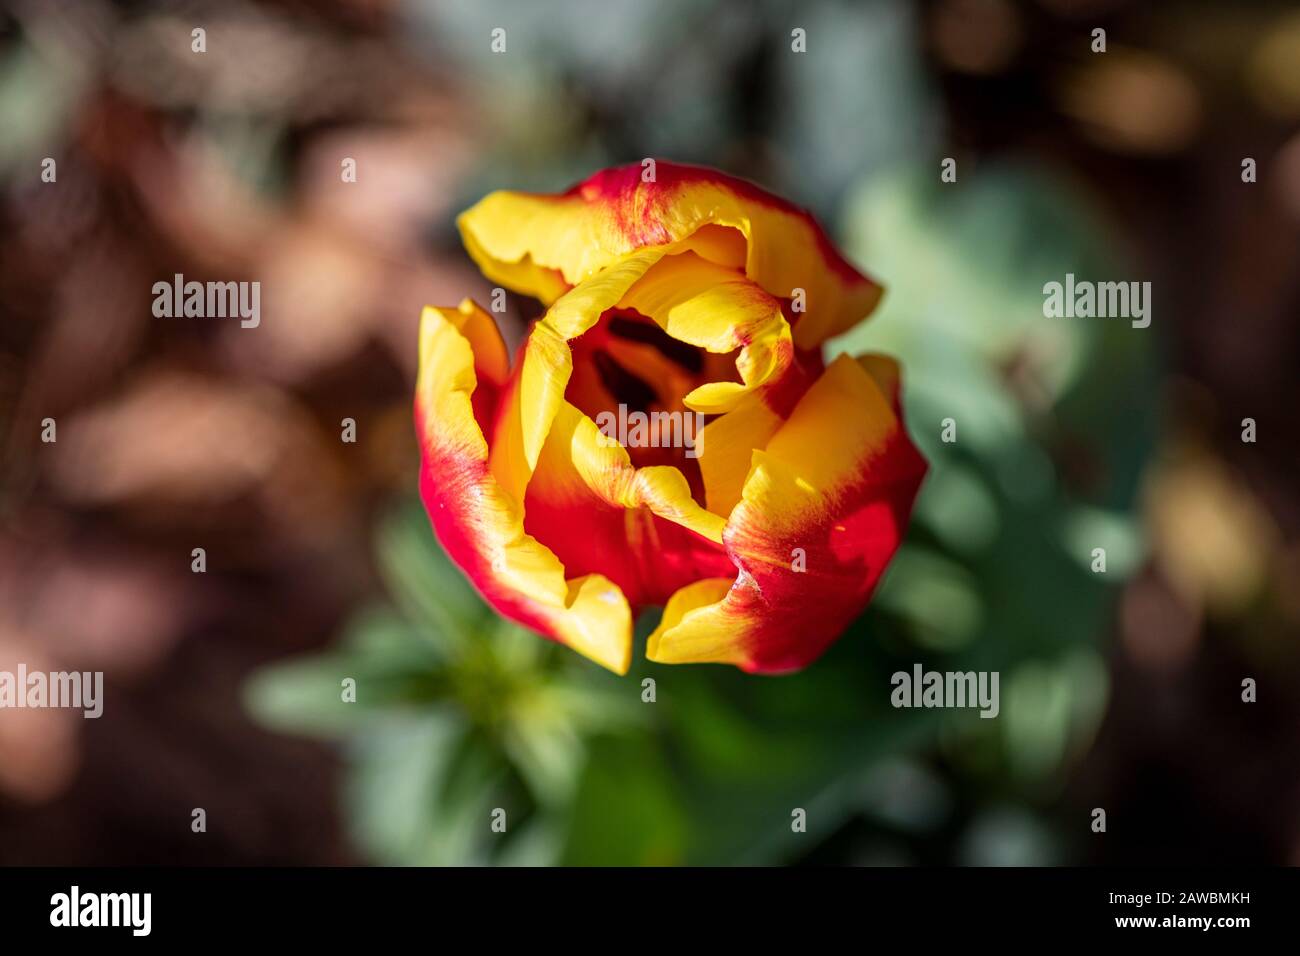 Top view of red-yellow tulip flower close-up on a blurred background Stock Photo